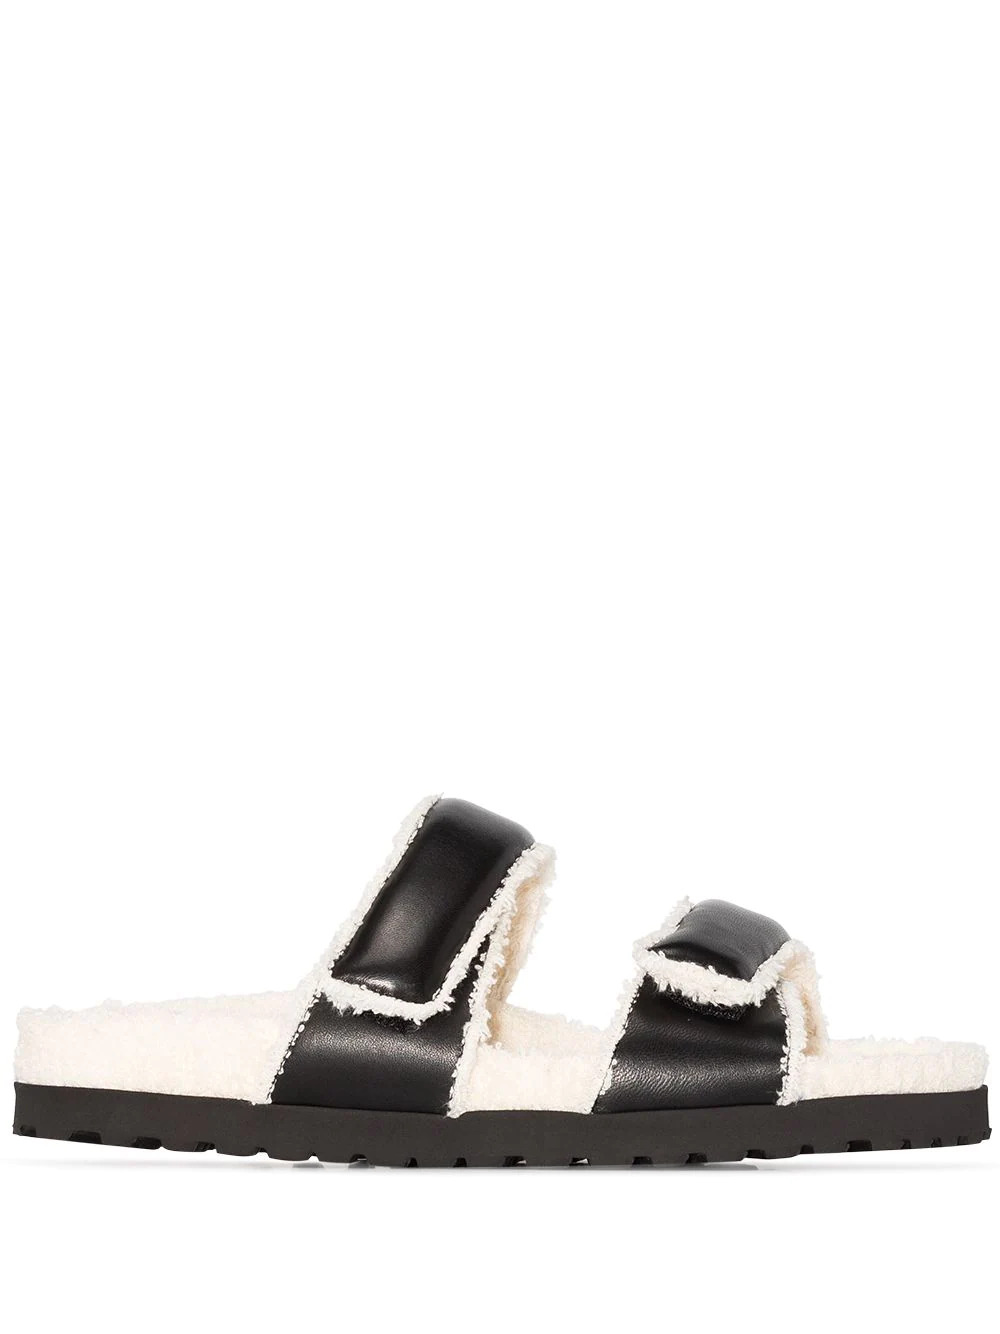 Double-Strap leather sandals in black